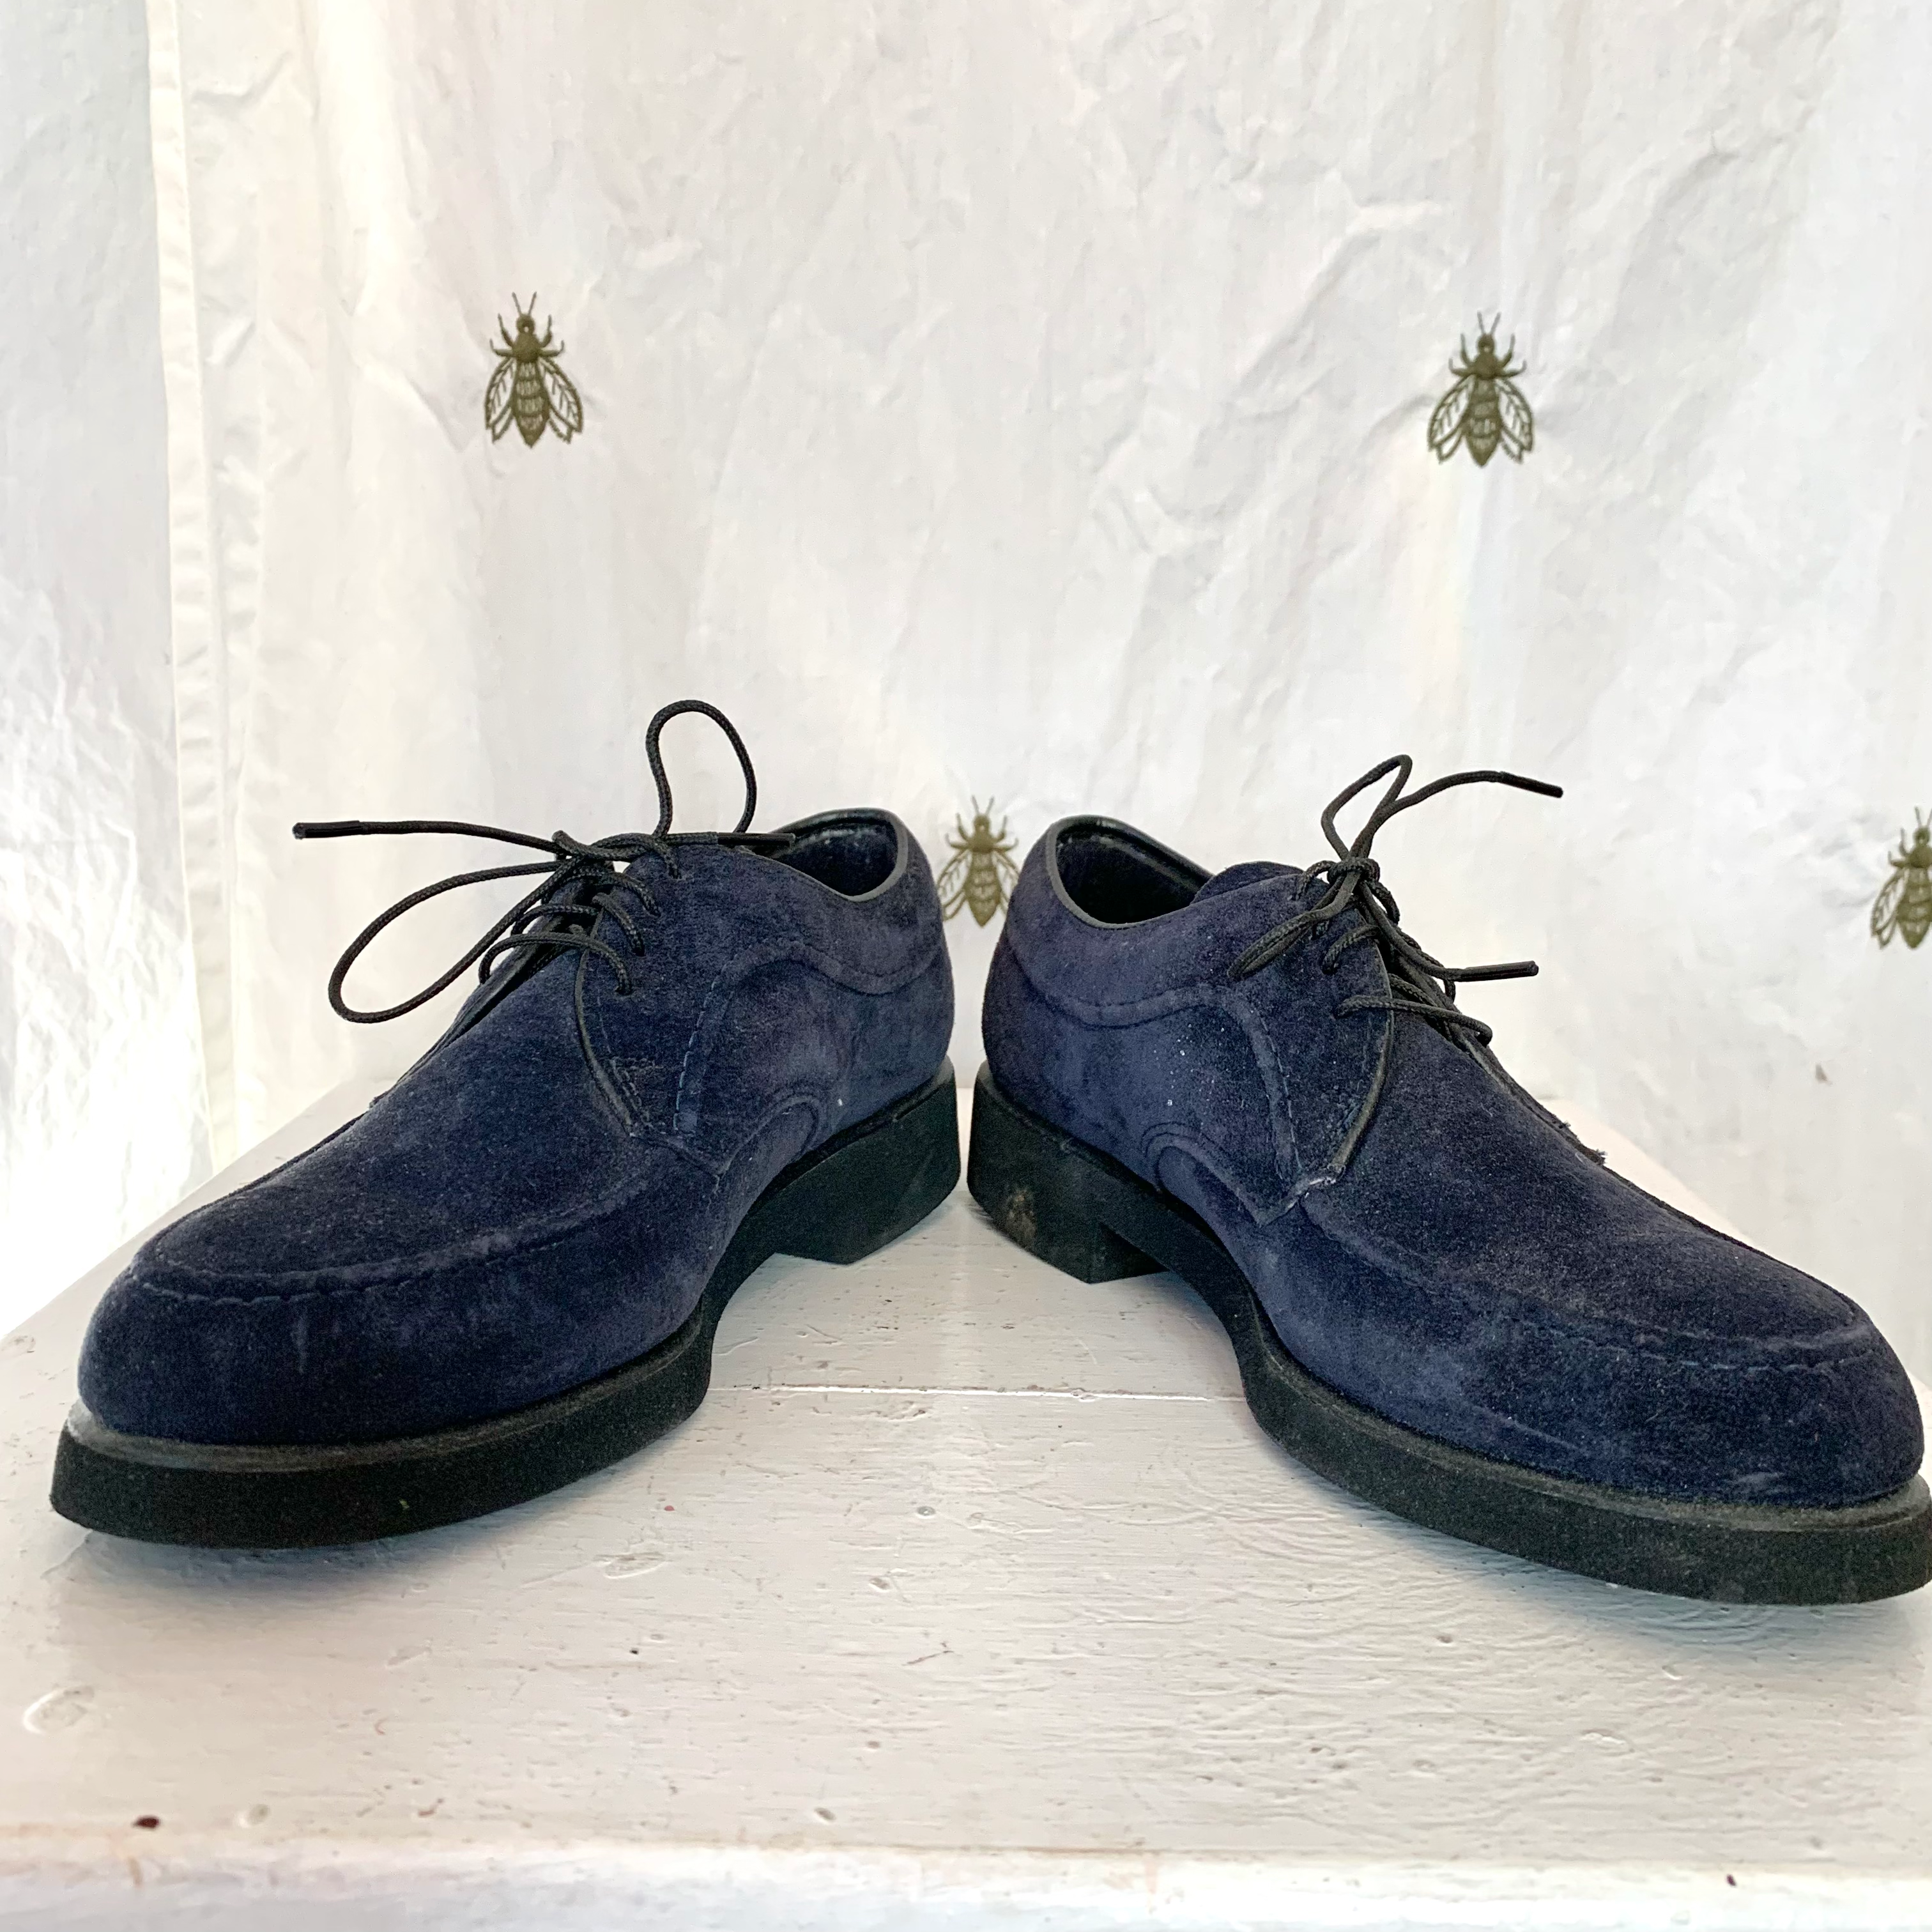 Vintage 6 1/2 Navy Blue Suede Oxford Hush Puppies by Puppies THRILLING